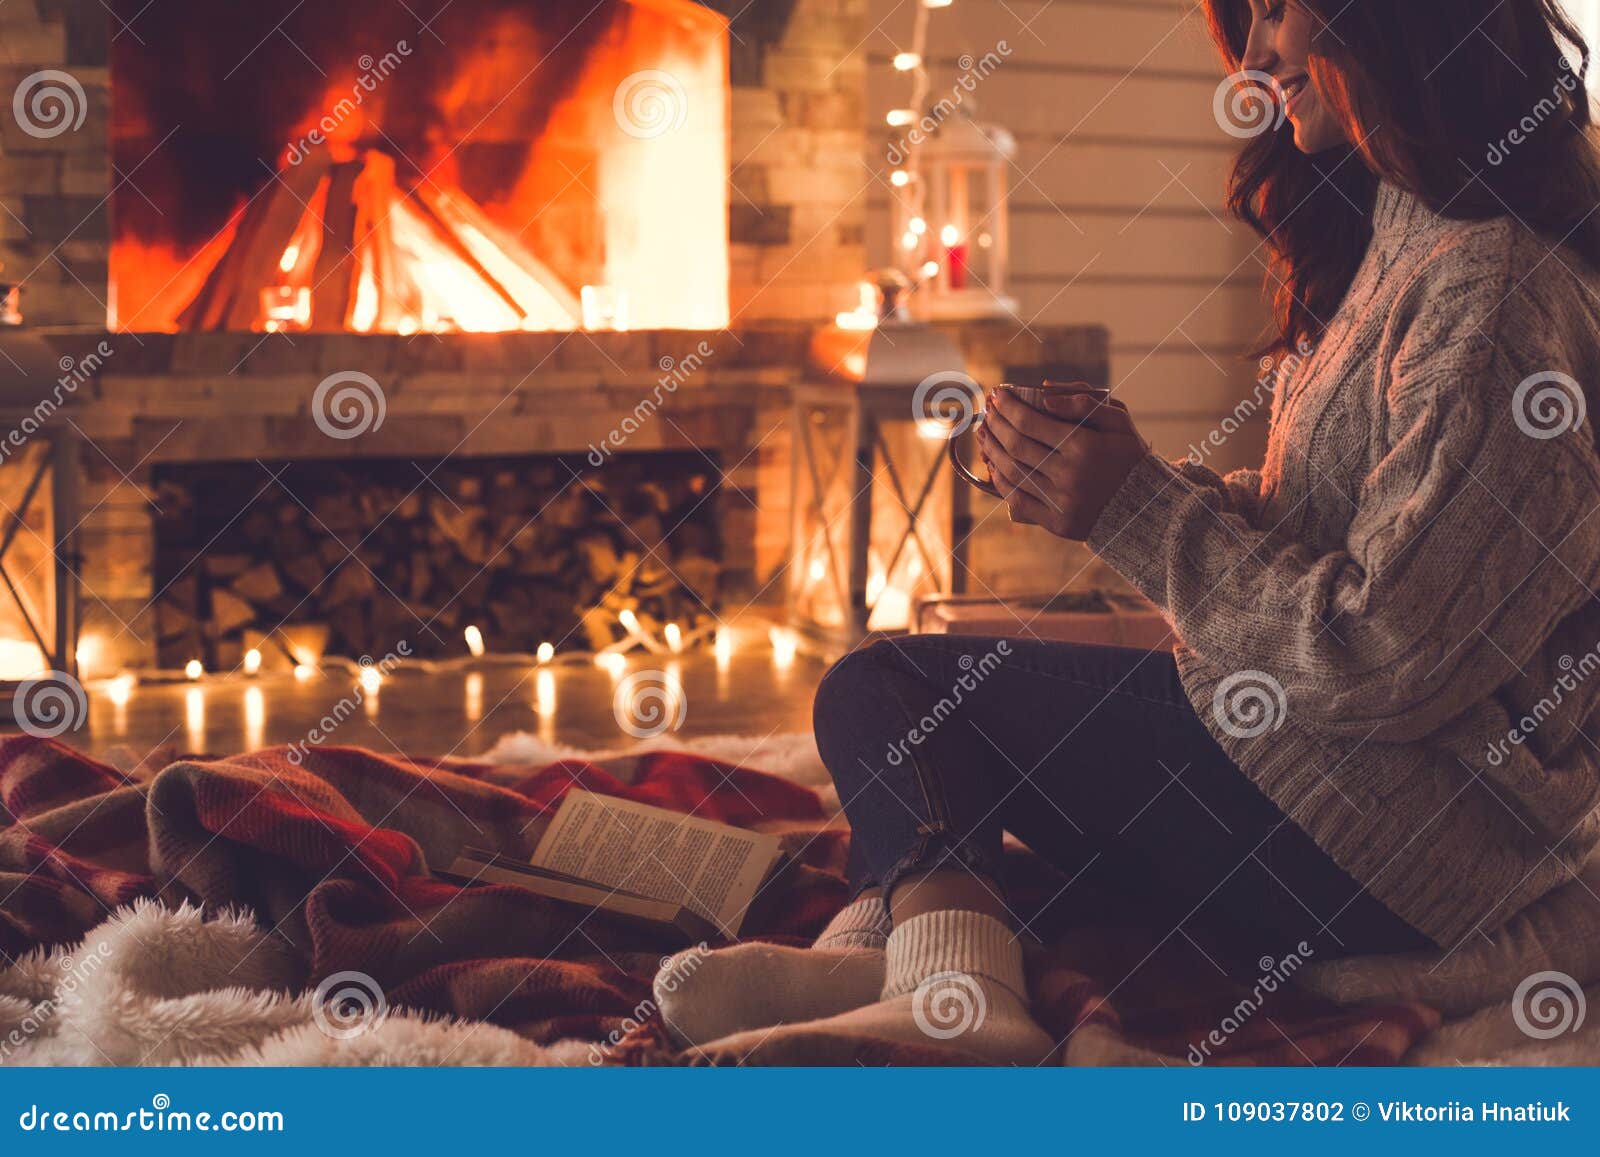 Young Woman Near Fireplace at Home Winter Concept Holding Cup Stock ...